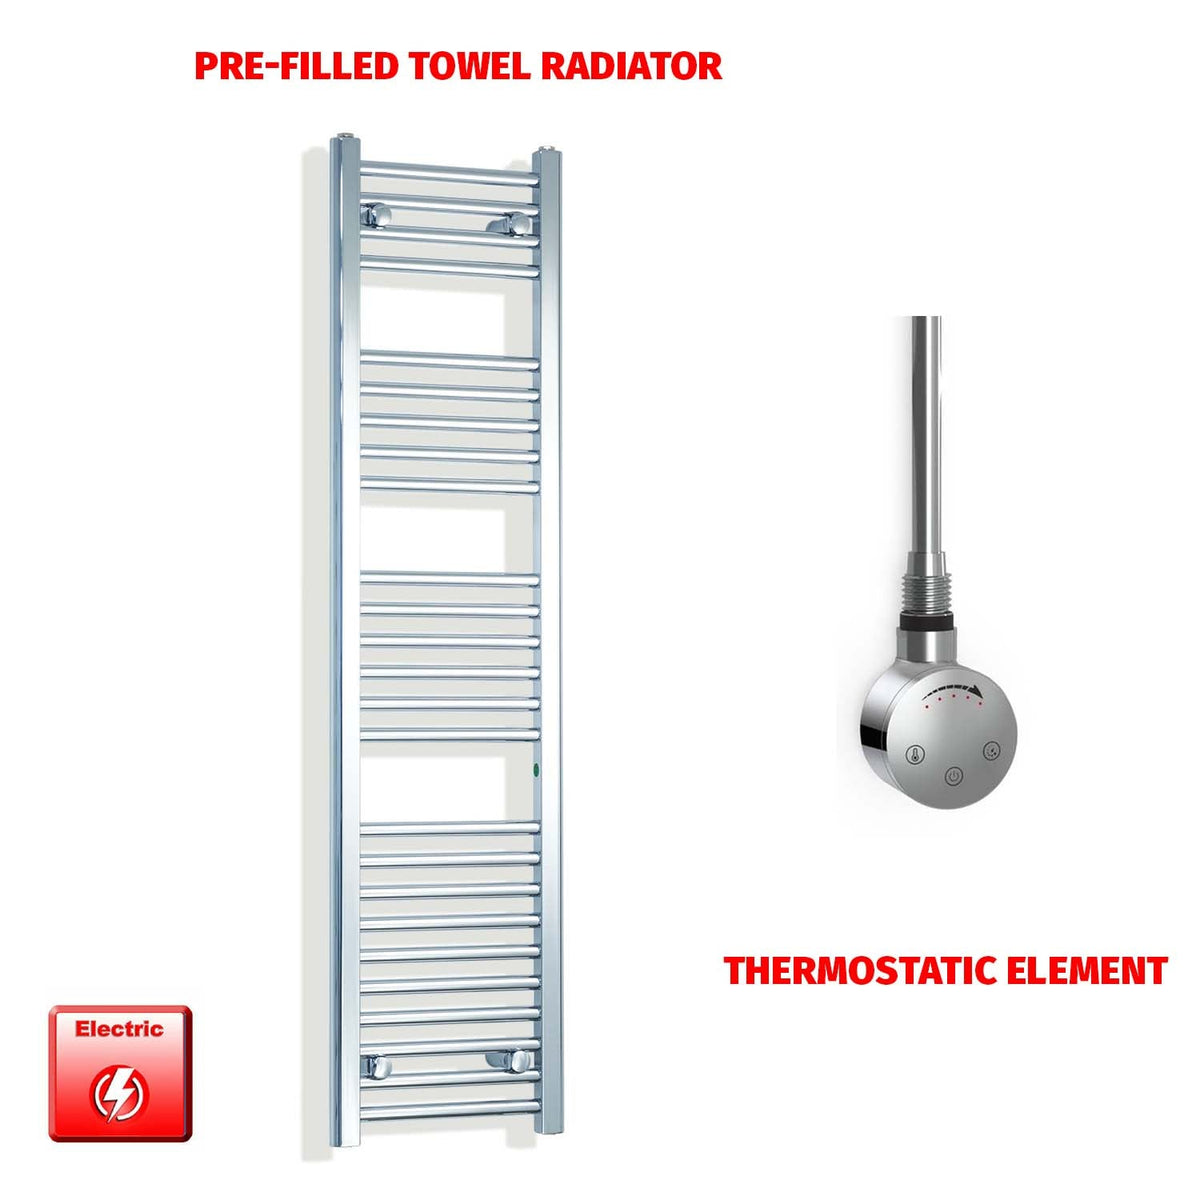 1400mm High 300mm Wide Pre-Filled Electric Heated Towel Rail Radiator Straight Chrome Smart Element No Timer